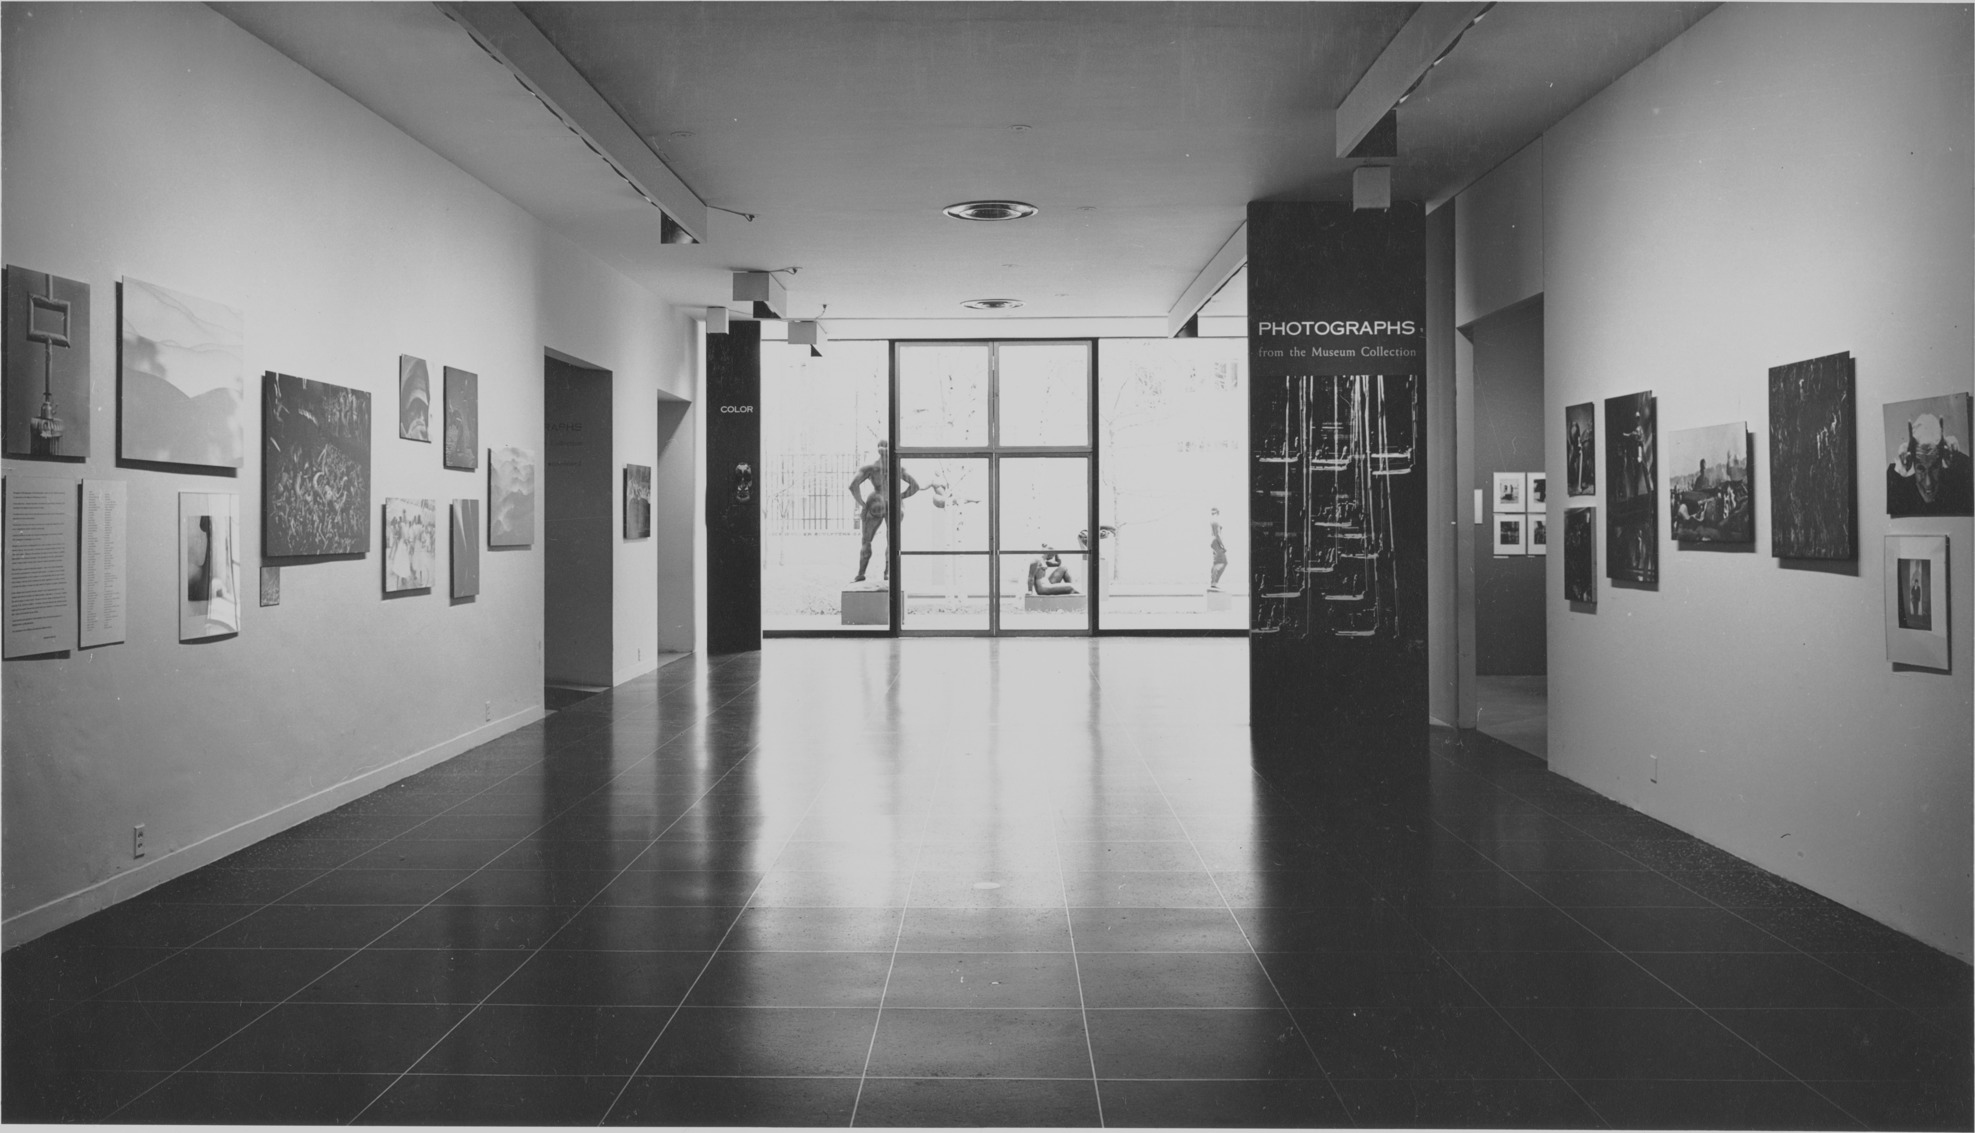 Photographs from the Museum Collection | MoMA